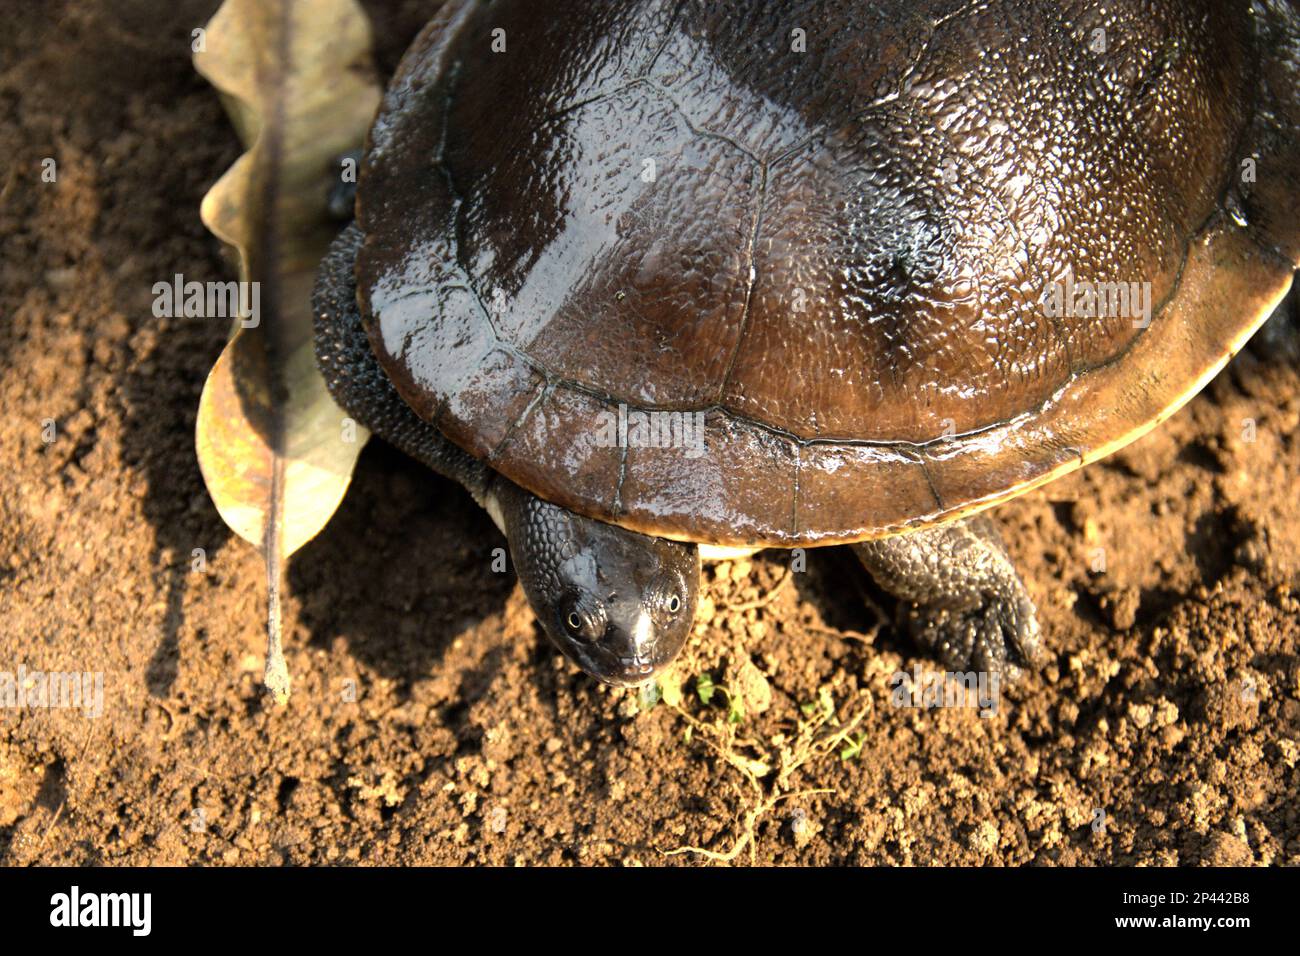 A rare and threatened species of freshwater turtle, the critically endangered Rote Island's endemic snake-necked turtle (Chelodina mccordi) is photographed at a licensed ex-situ breeding facility in Jakarta, Indonesia. Stock Photo